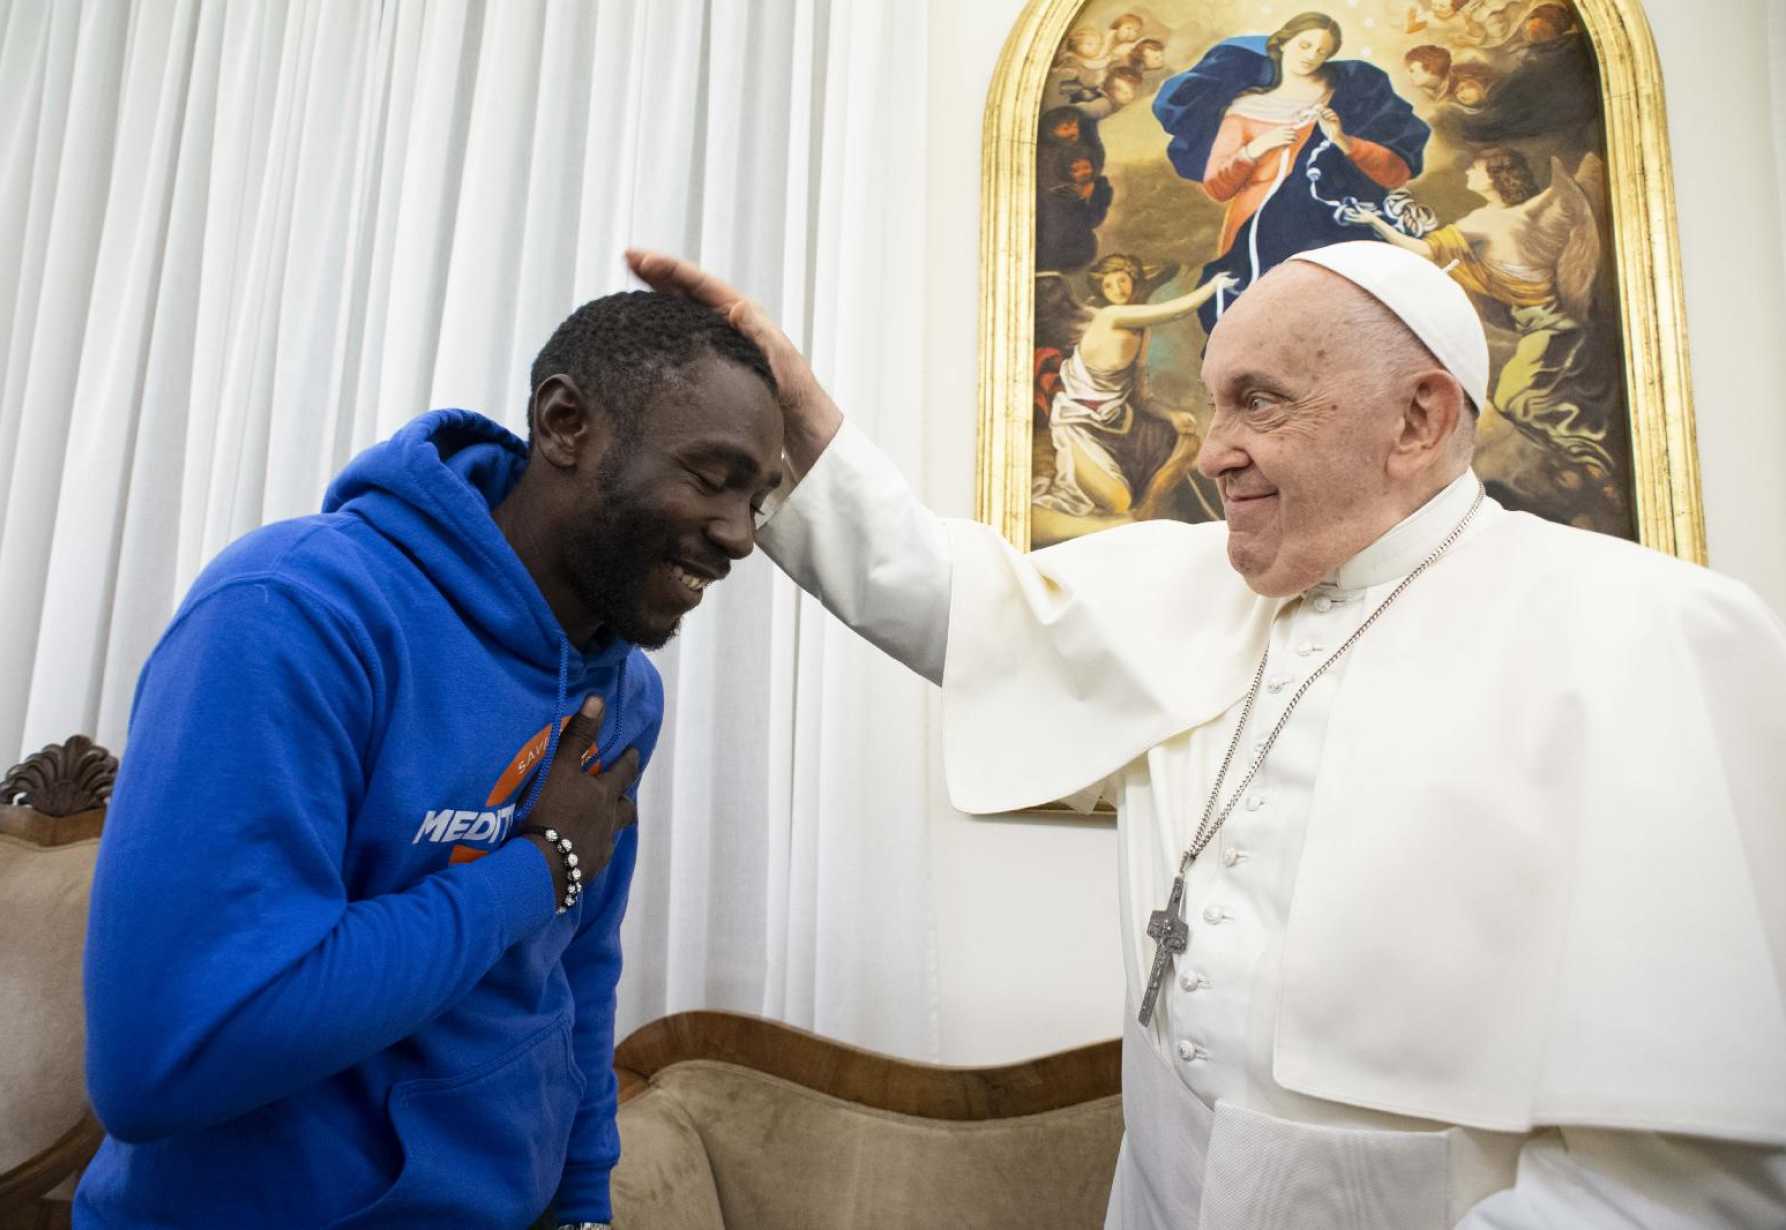 Pope welcomes migrant he's been praying for since July